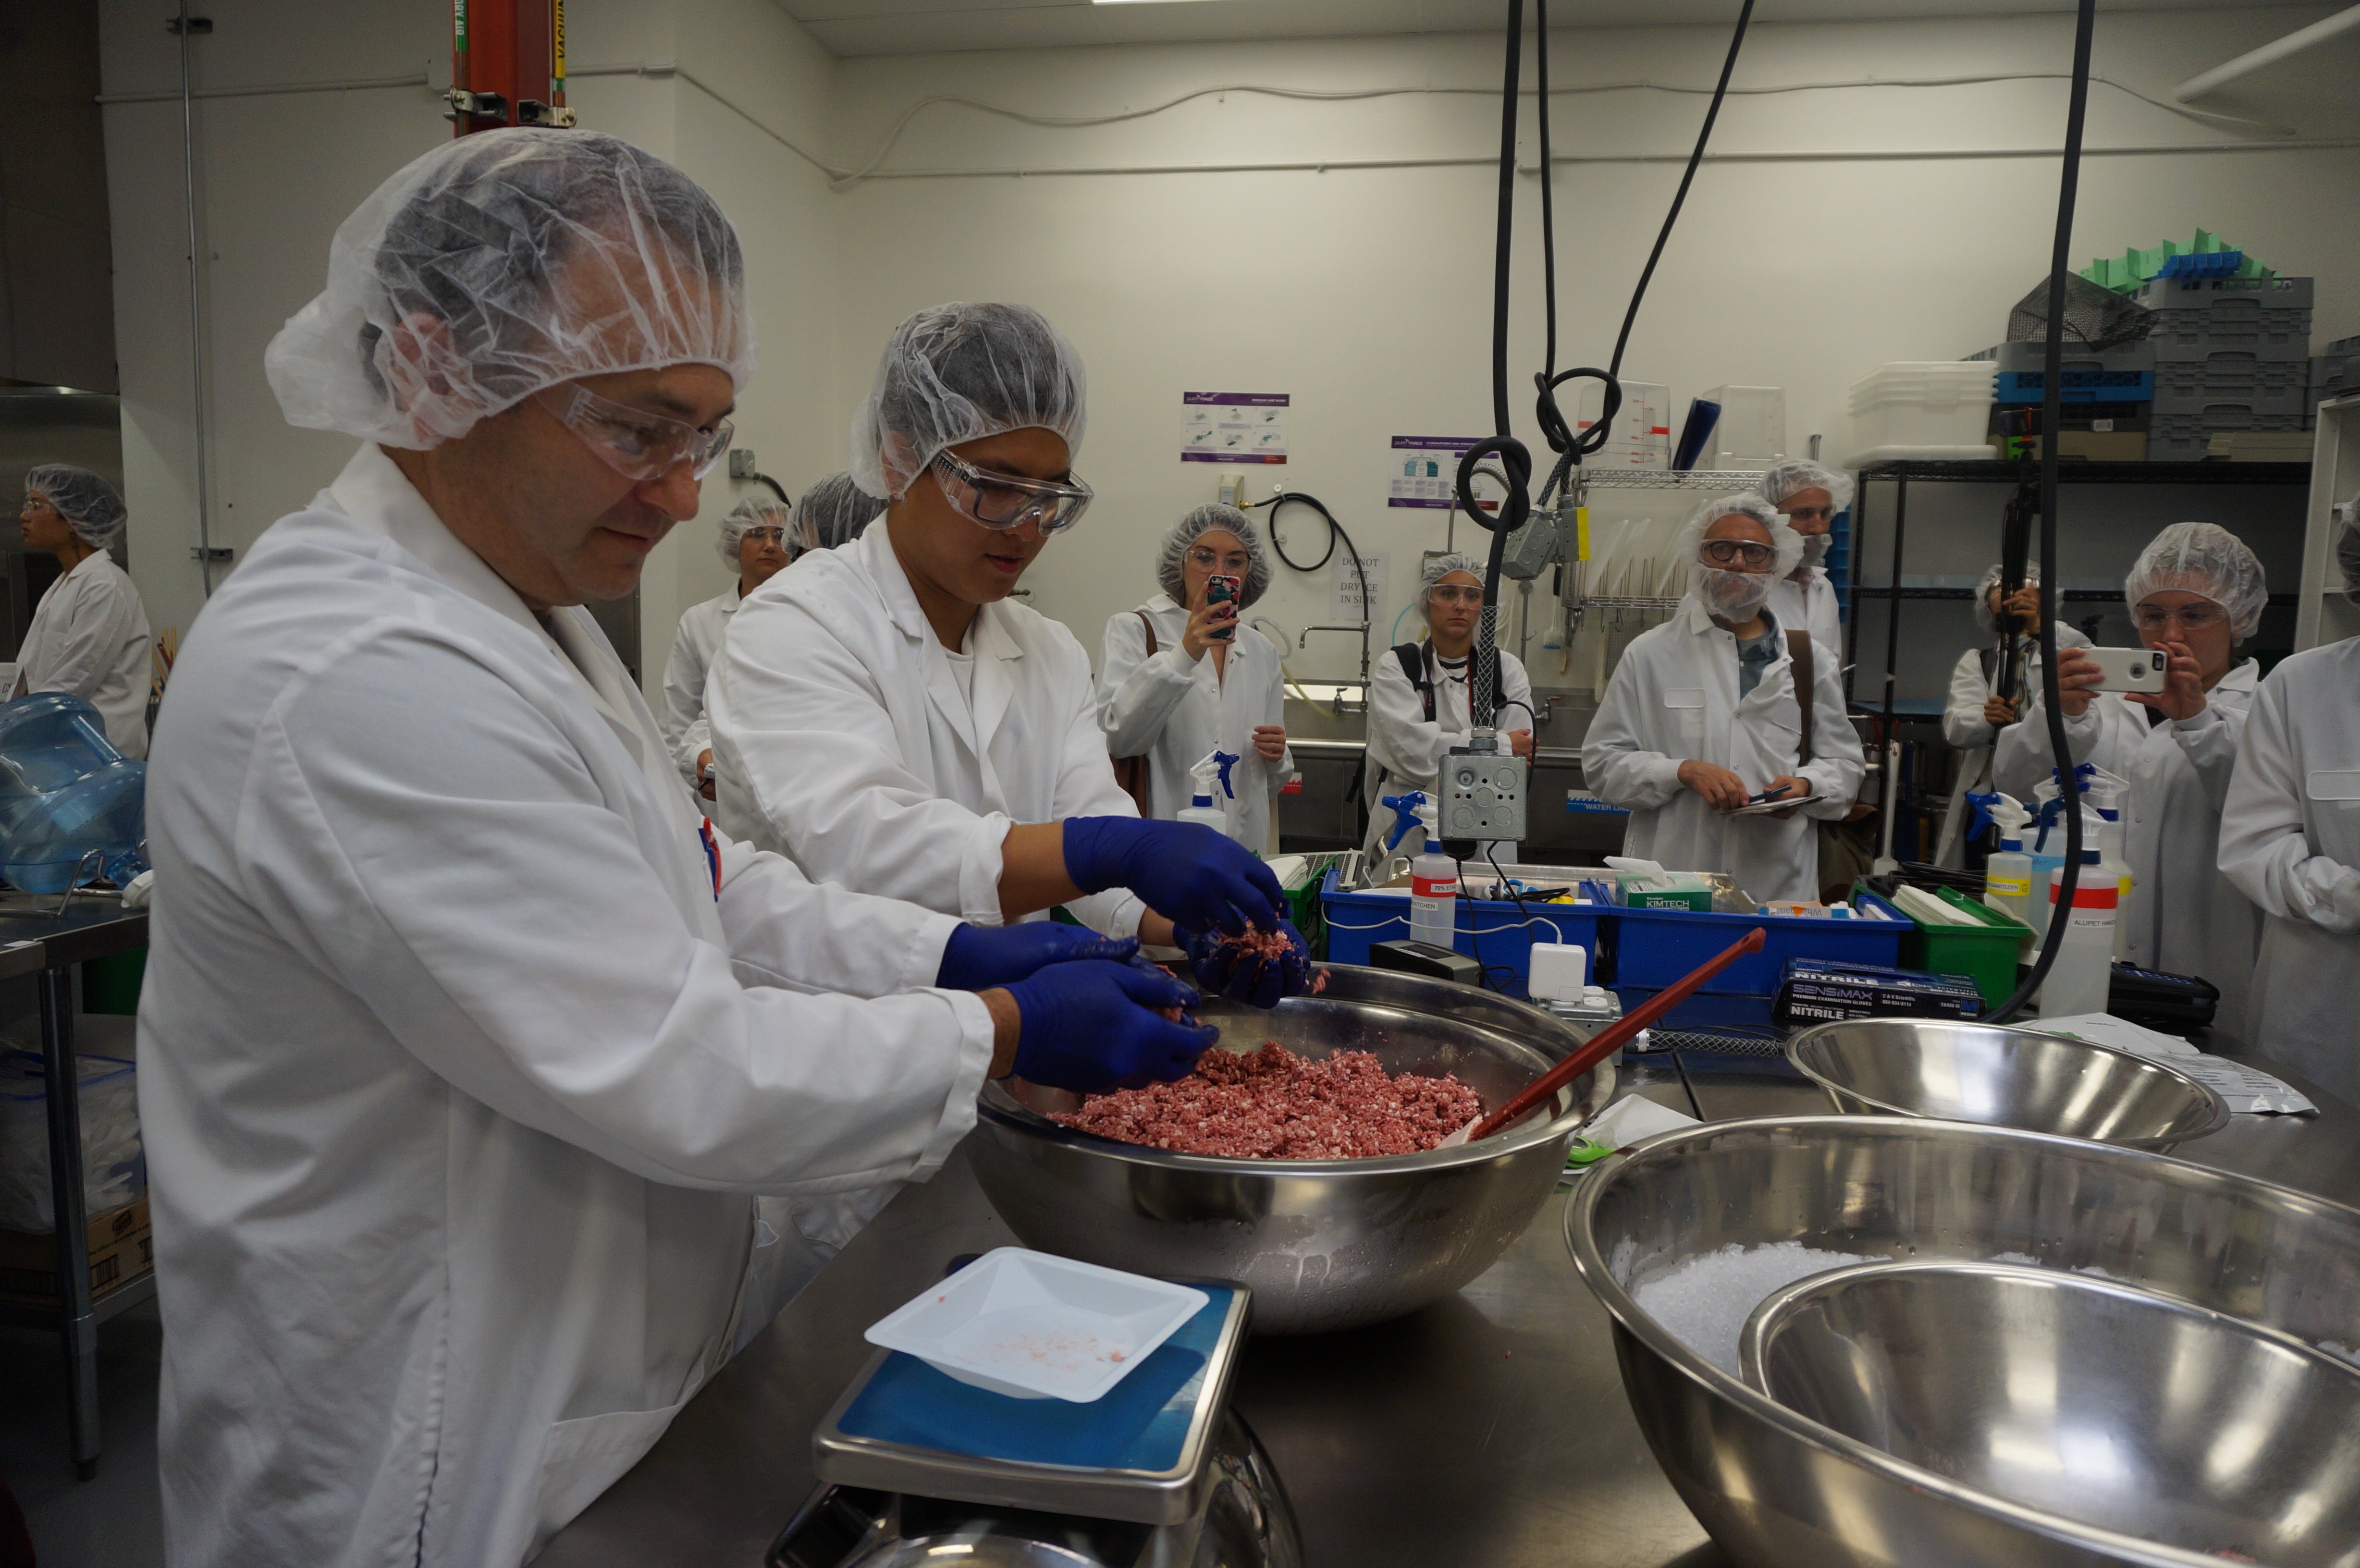 Lab workers at Impossible Foods test the plant-based burger.